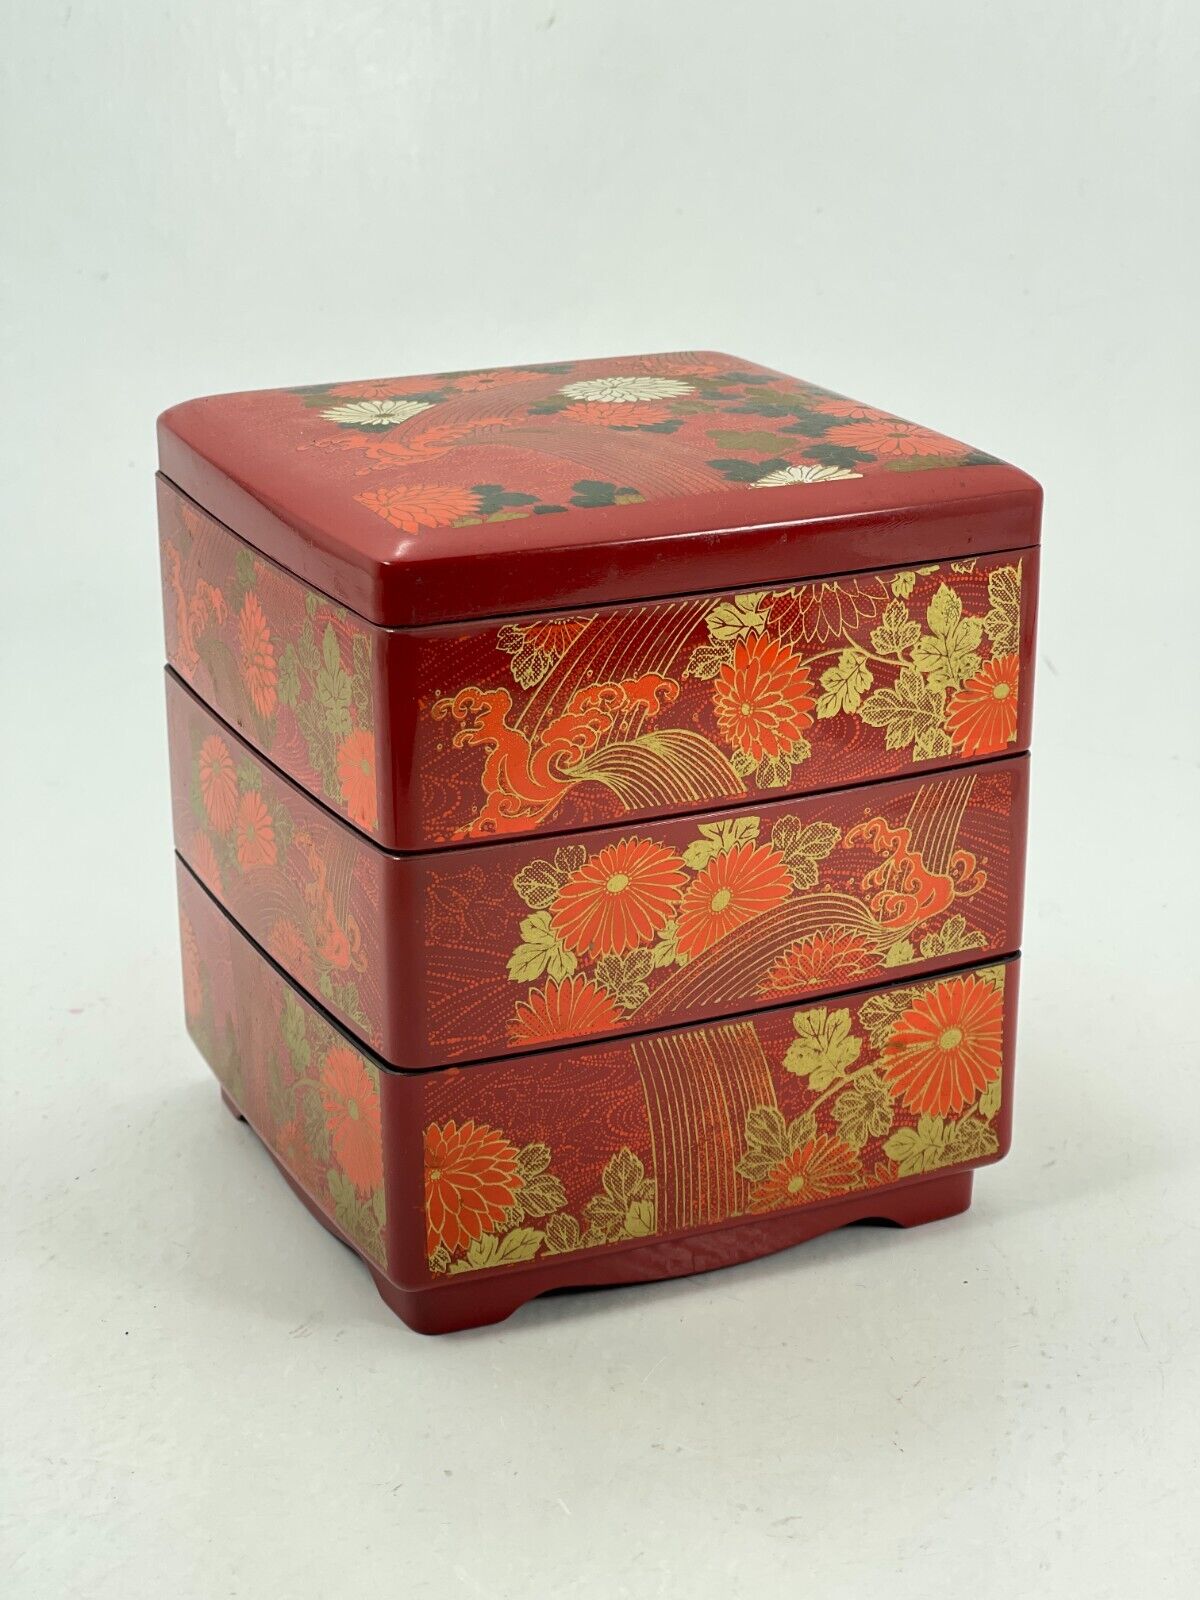 Vintage Japan Yamanaka Stackable Red Jewelry Trinket Coin Box 3 Tier Lidded Red